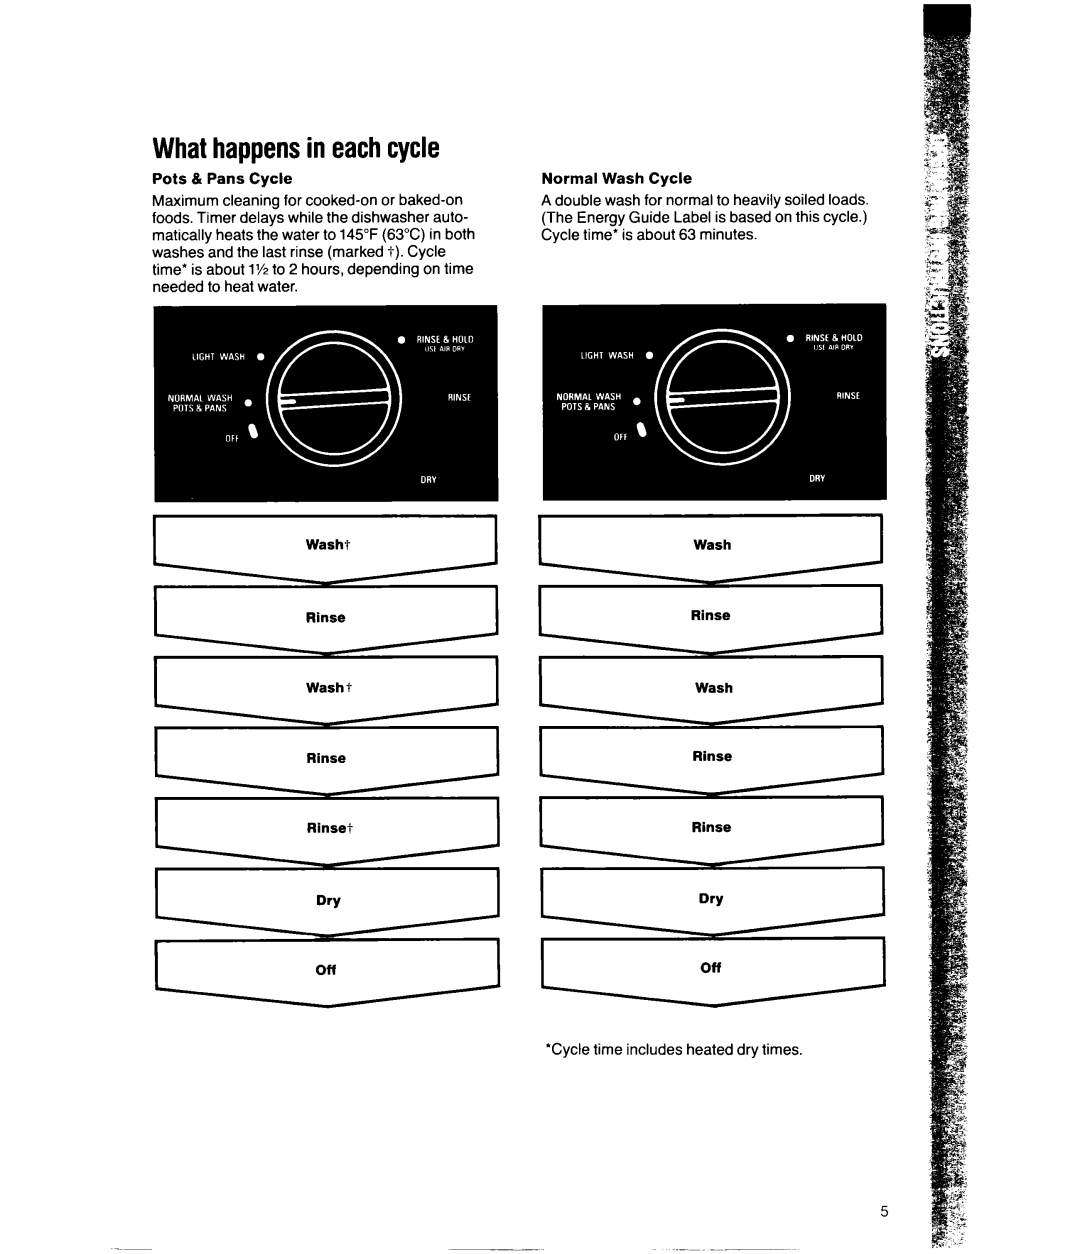 Whirlpool DP8350XV manual Whathappensin eachcycle 